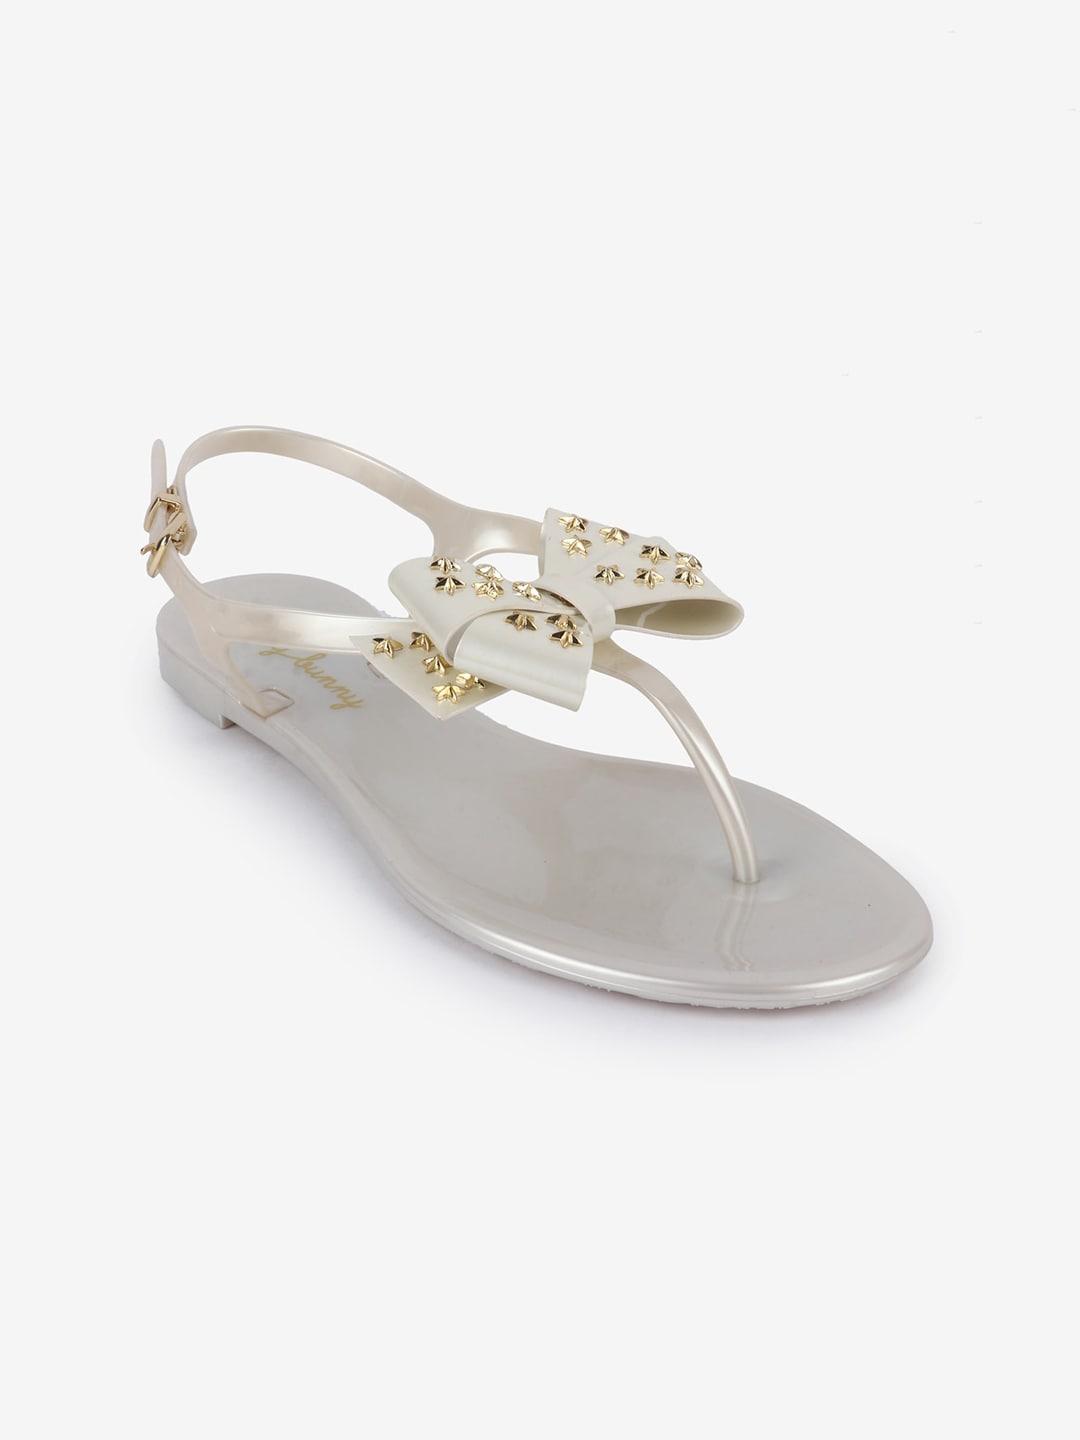 jelly-bunny-women-white-embellished-bows-flats-t-strap-flats